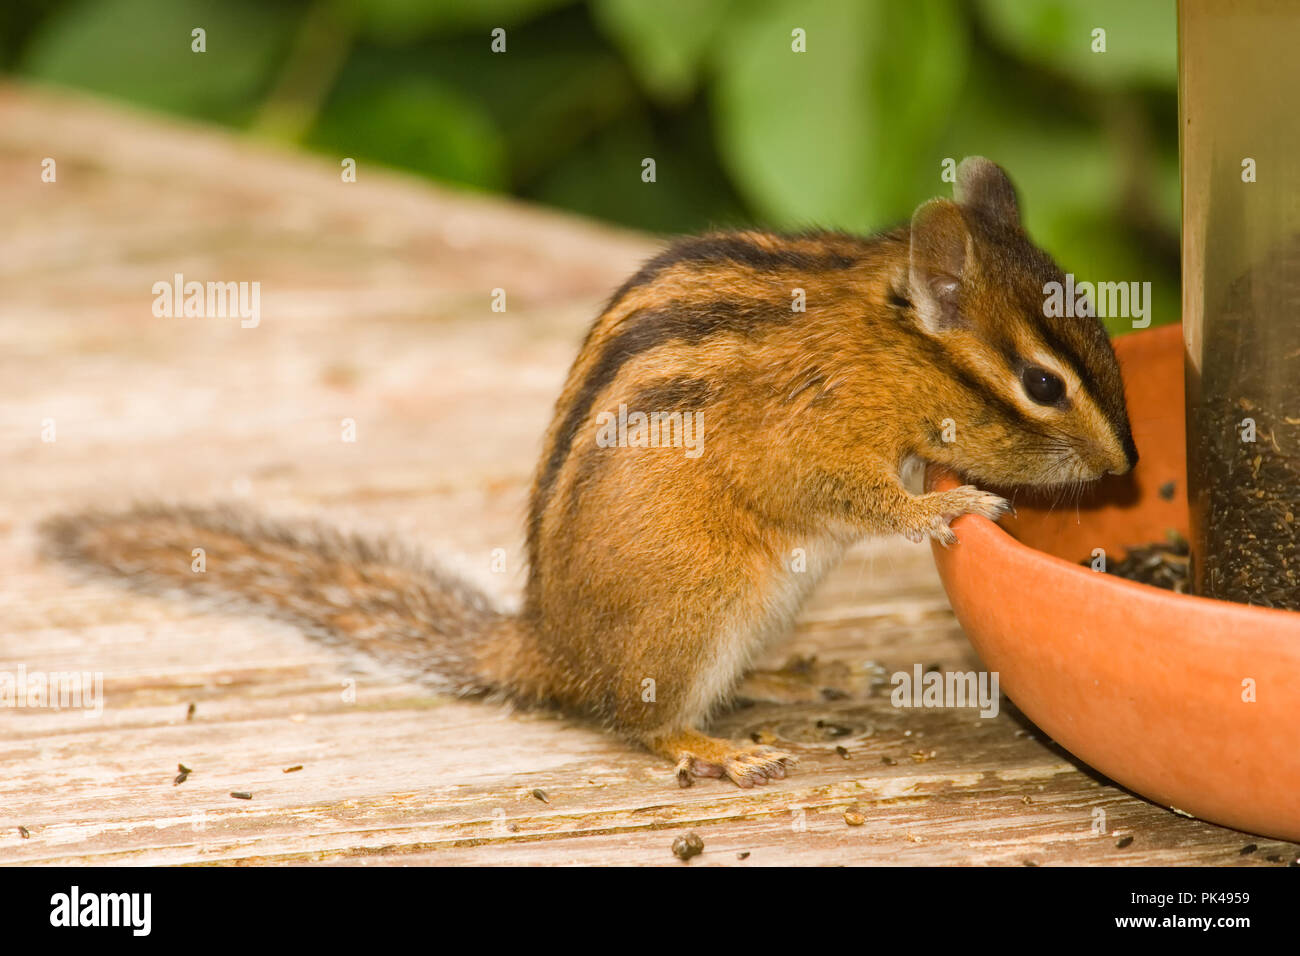 Yellow-pine Chipmunk eating nijer seed from a bird feeder sitting on a wooden deck Stock Photo